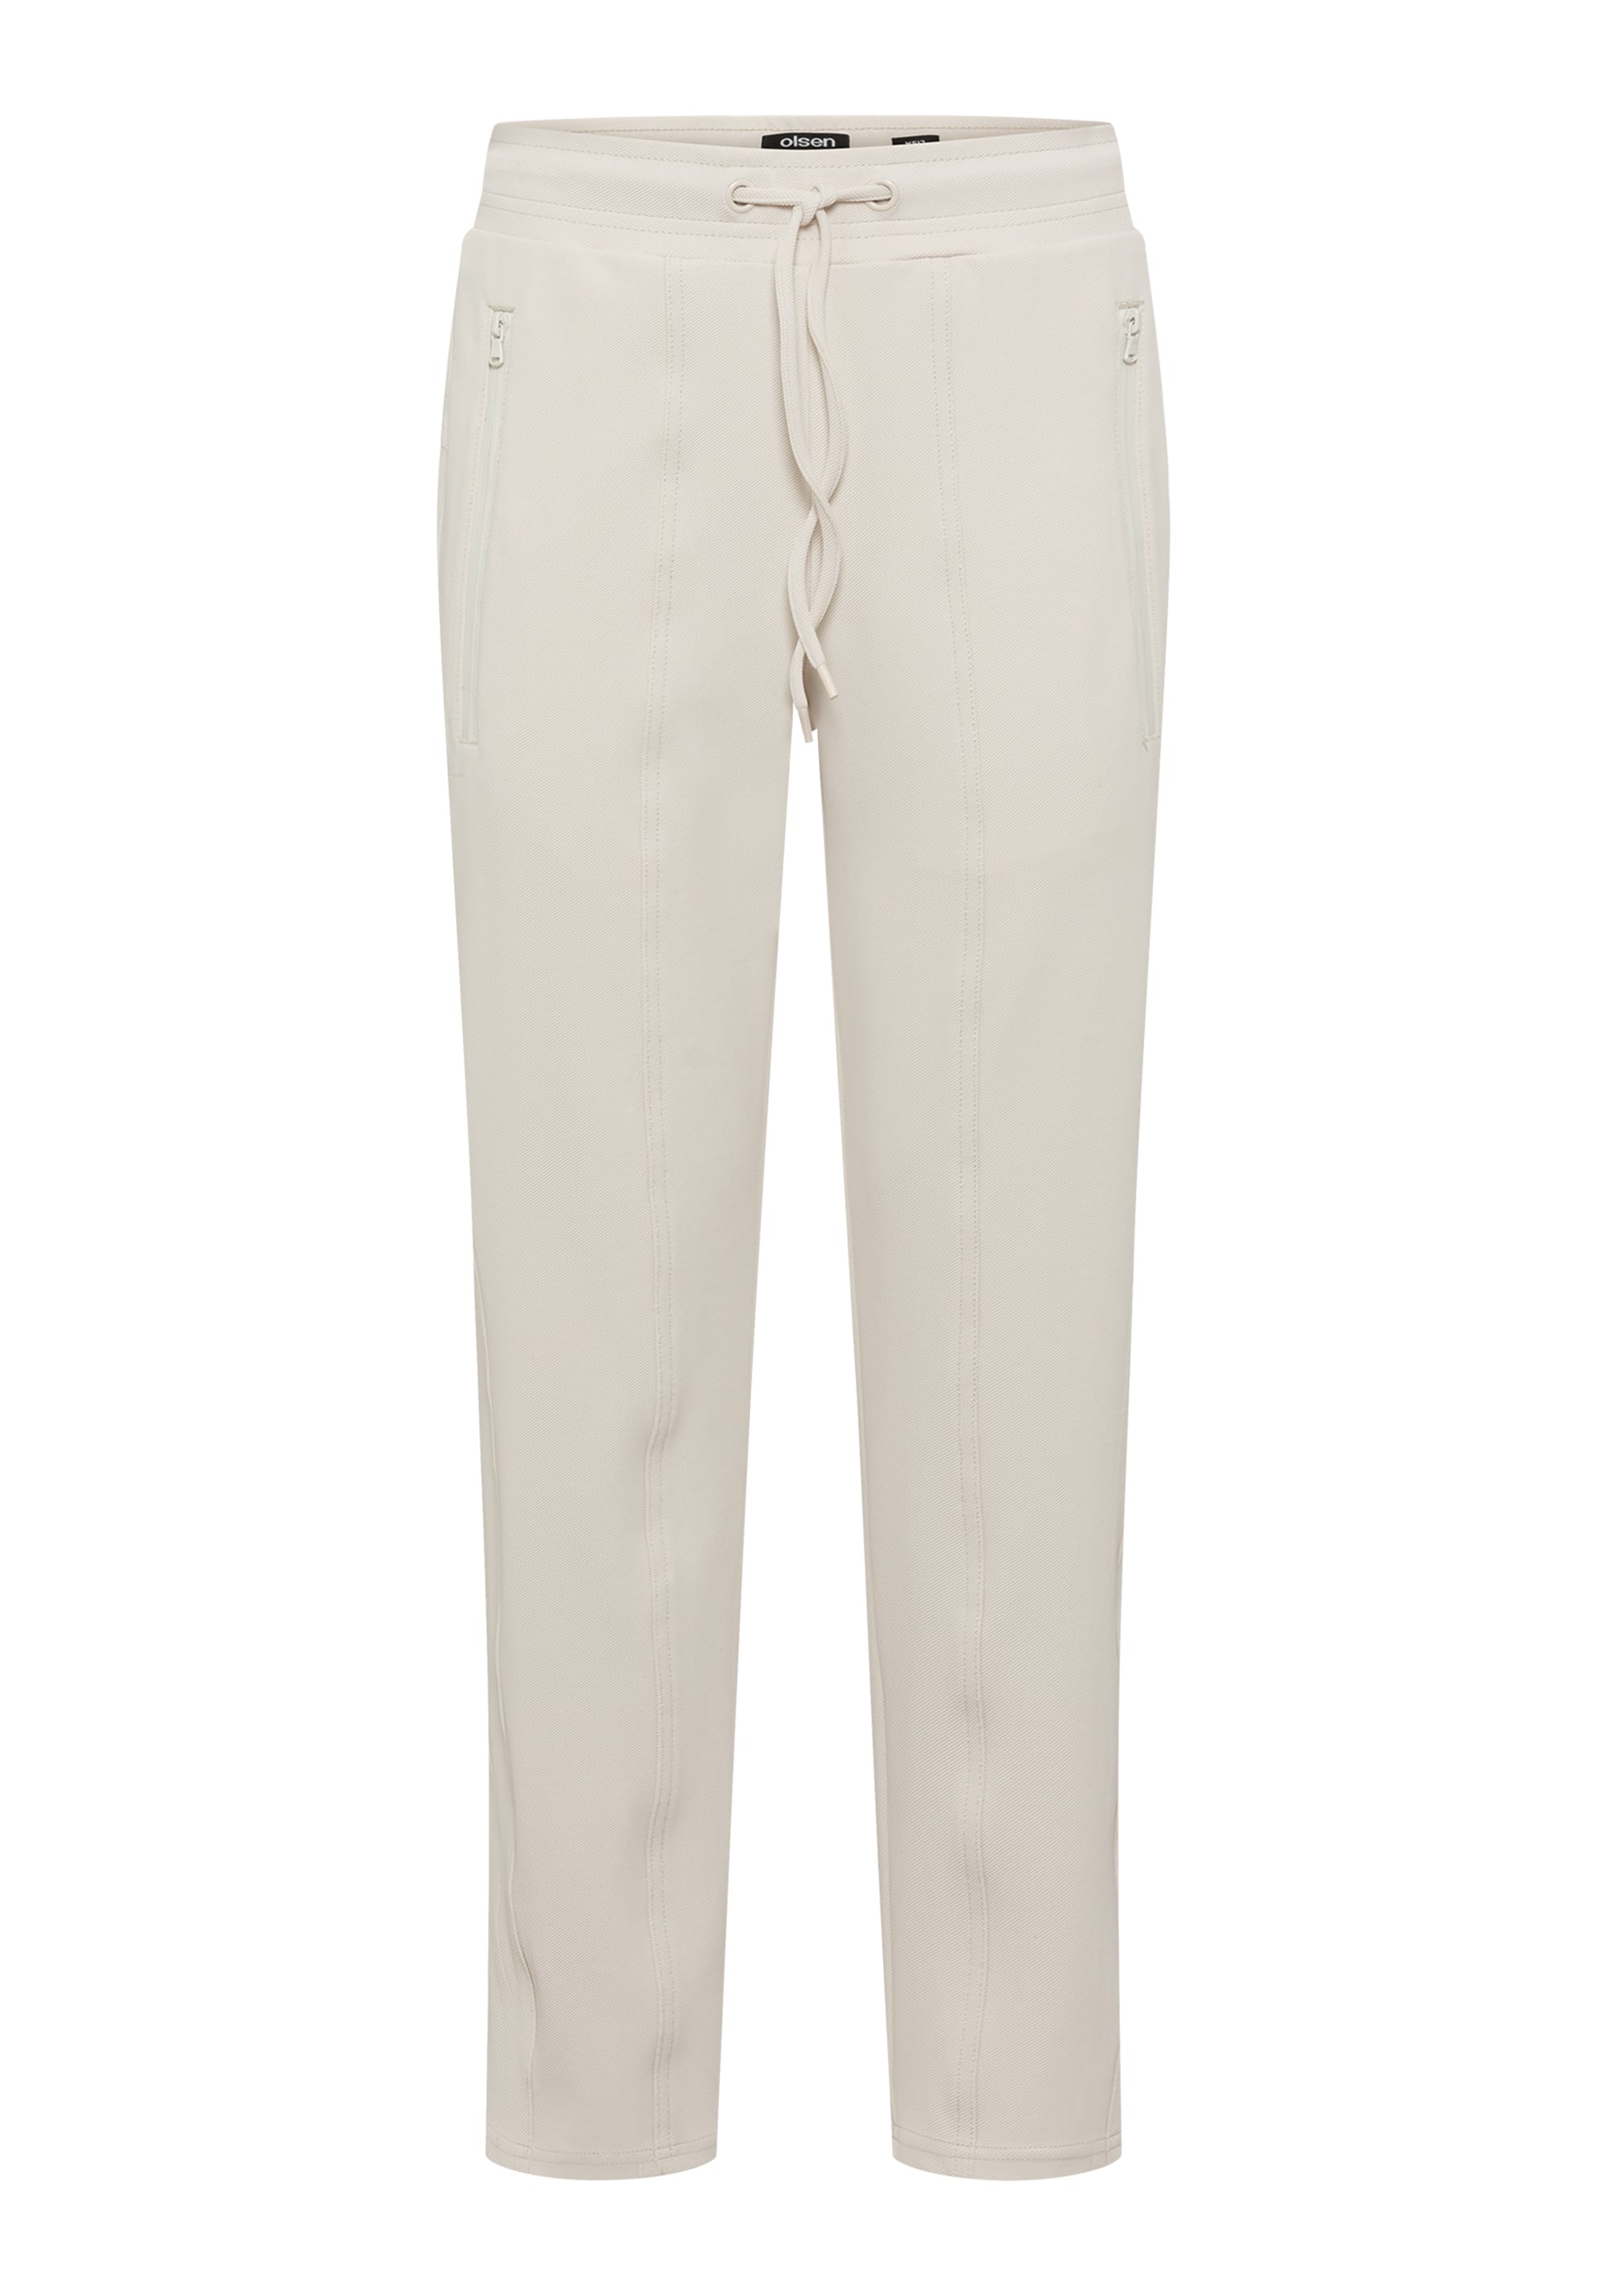 aent- Ladies Mid Rise Tapered Leg Drawstring Pant - Wicked Smart